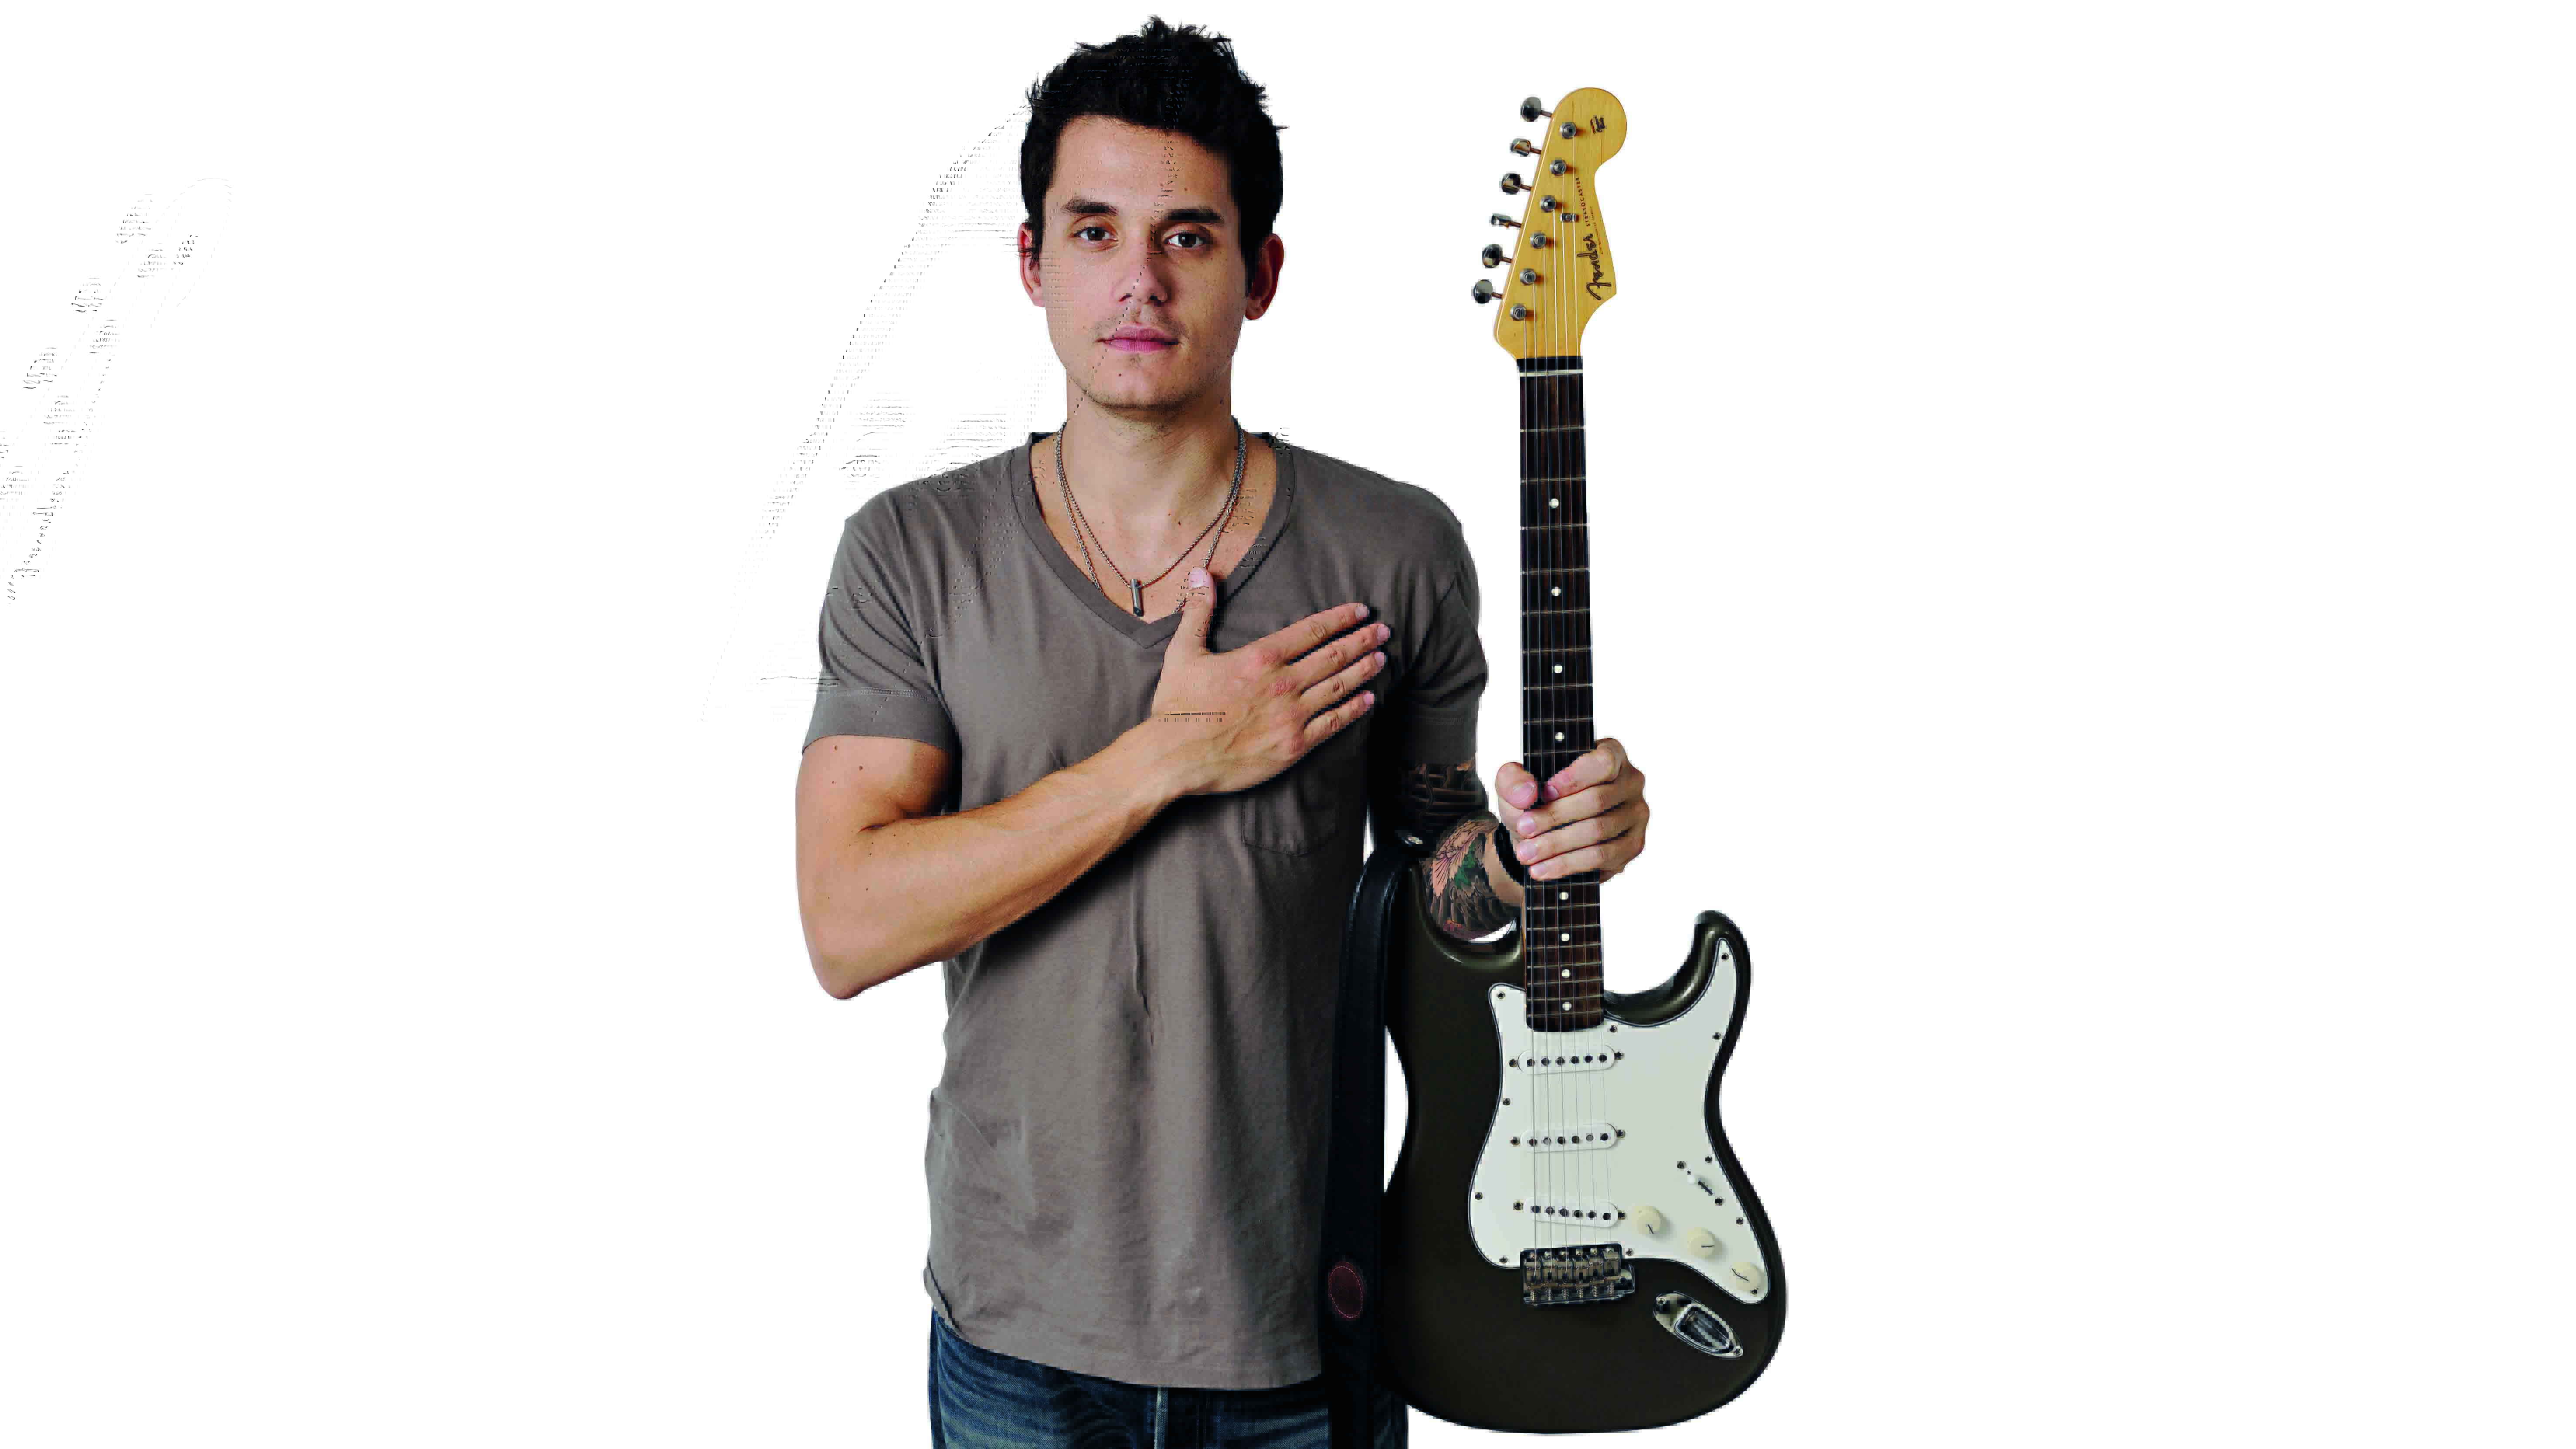 Say what you need to say john mayer album